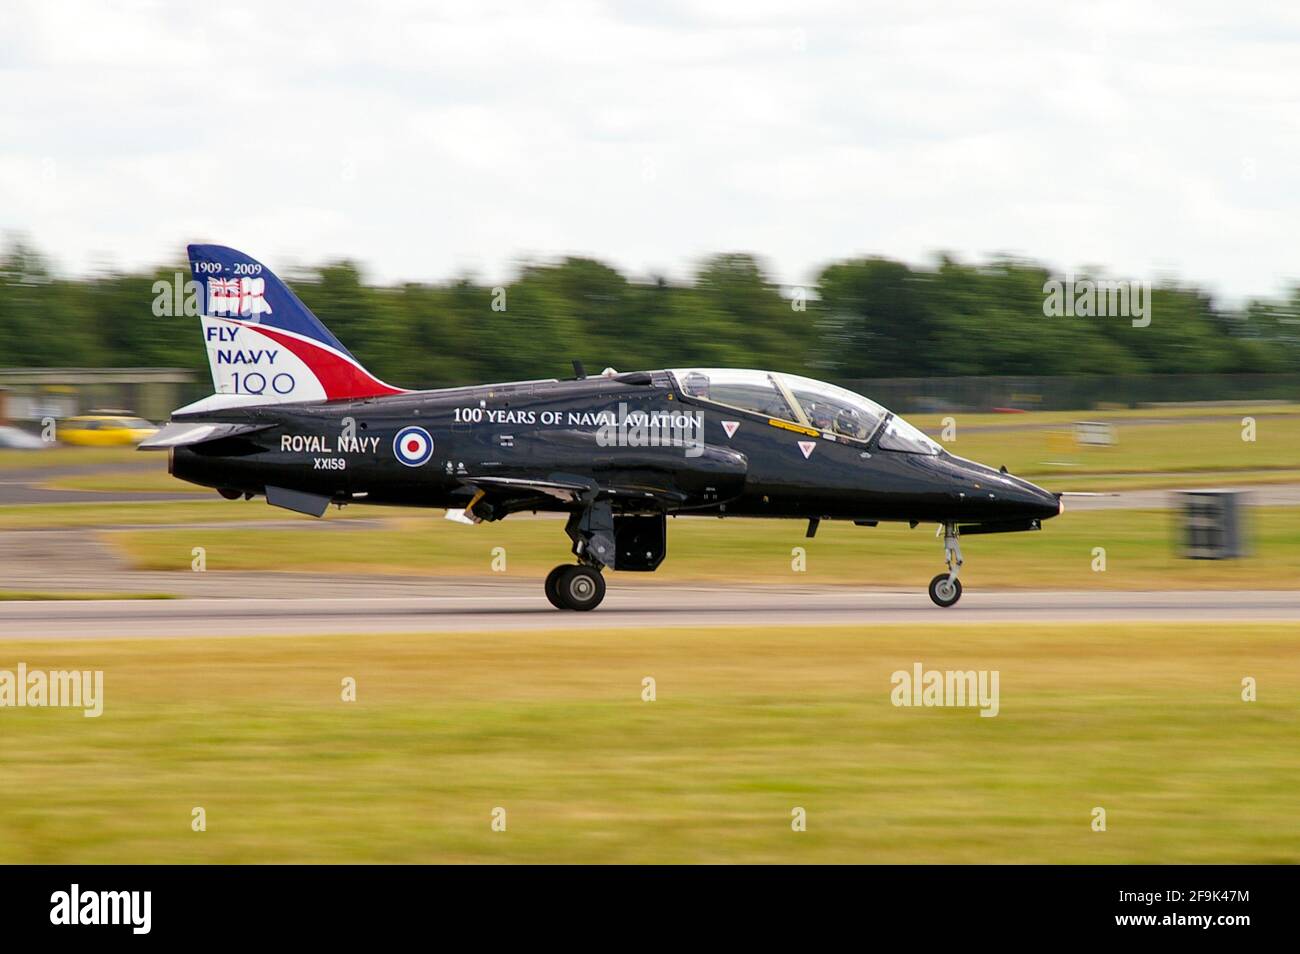 British Aerospace BAe Hawk T1 jet trainer plane with special Fleet Air Arm, Royal Navy centenary, 100 years of naval aviation, Fly Navy 100 scheme Stock Photo